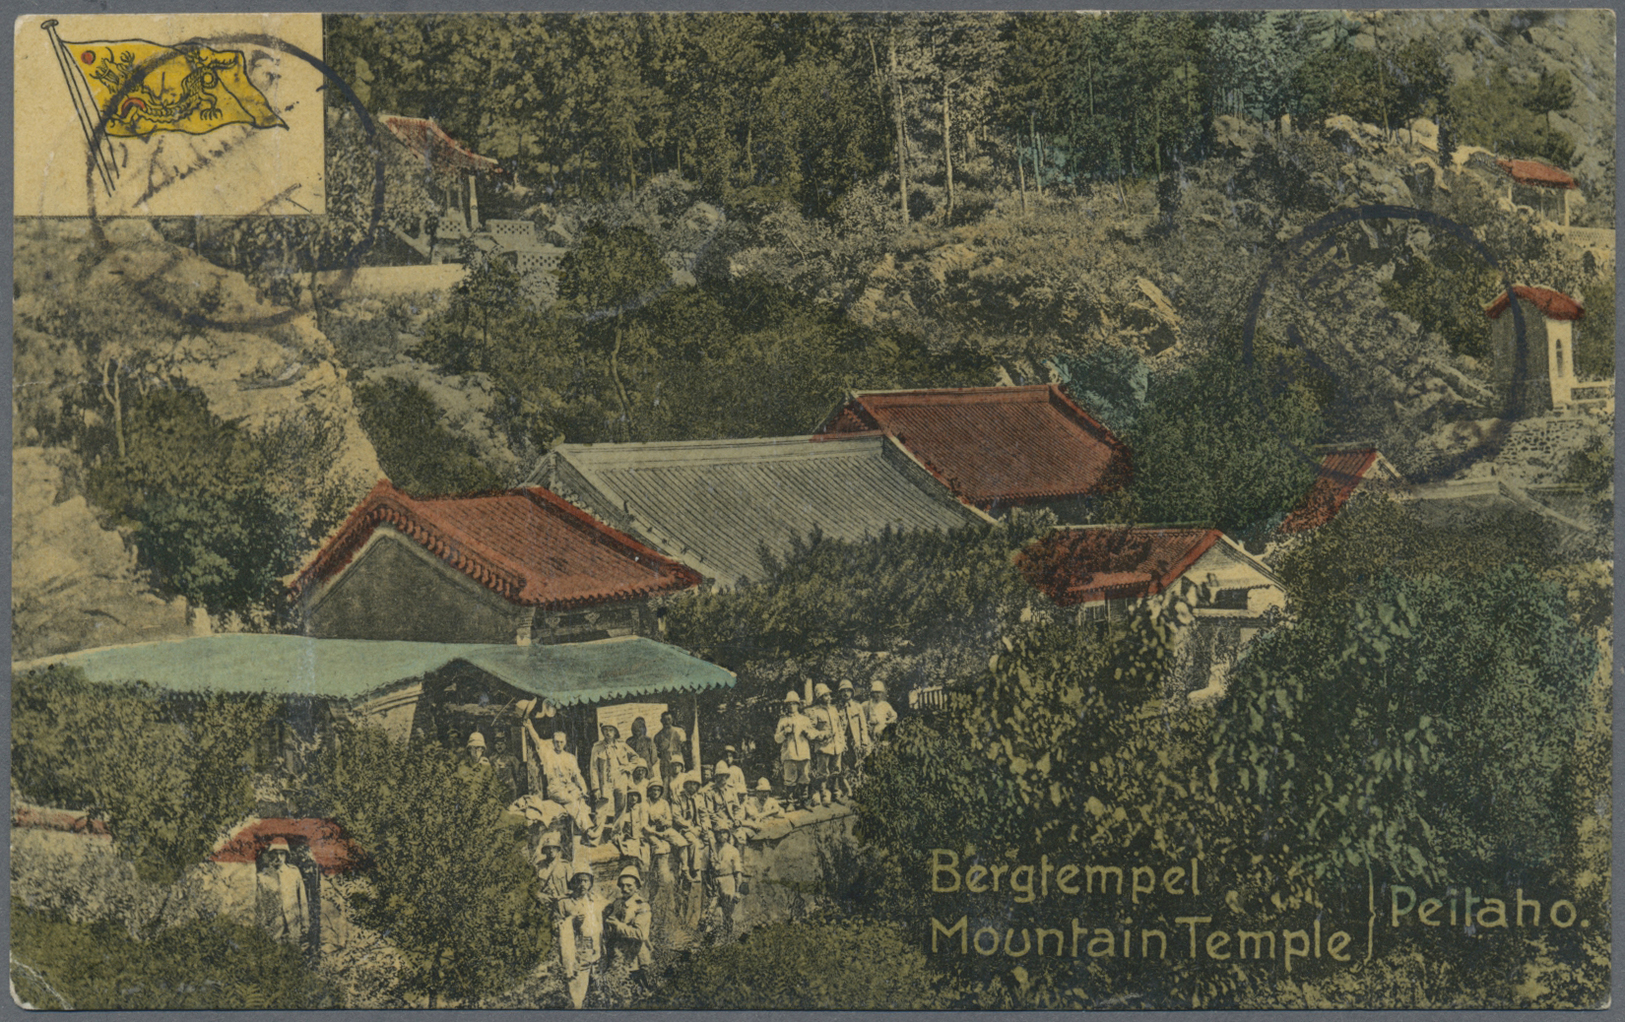 Br Indien - Feldpost: 1909. Picture Post Card Of 'Mountain Temple, Peitaho' Addressed To Shan-Hai-Kwan Bearing C.E.F. SG - Military Service Stamp